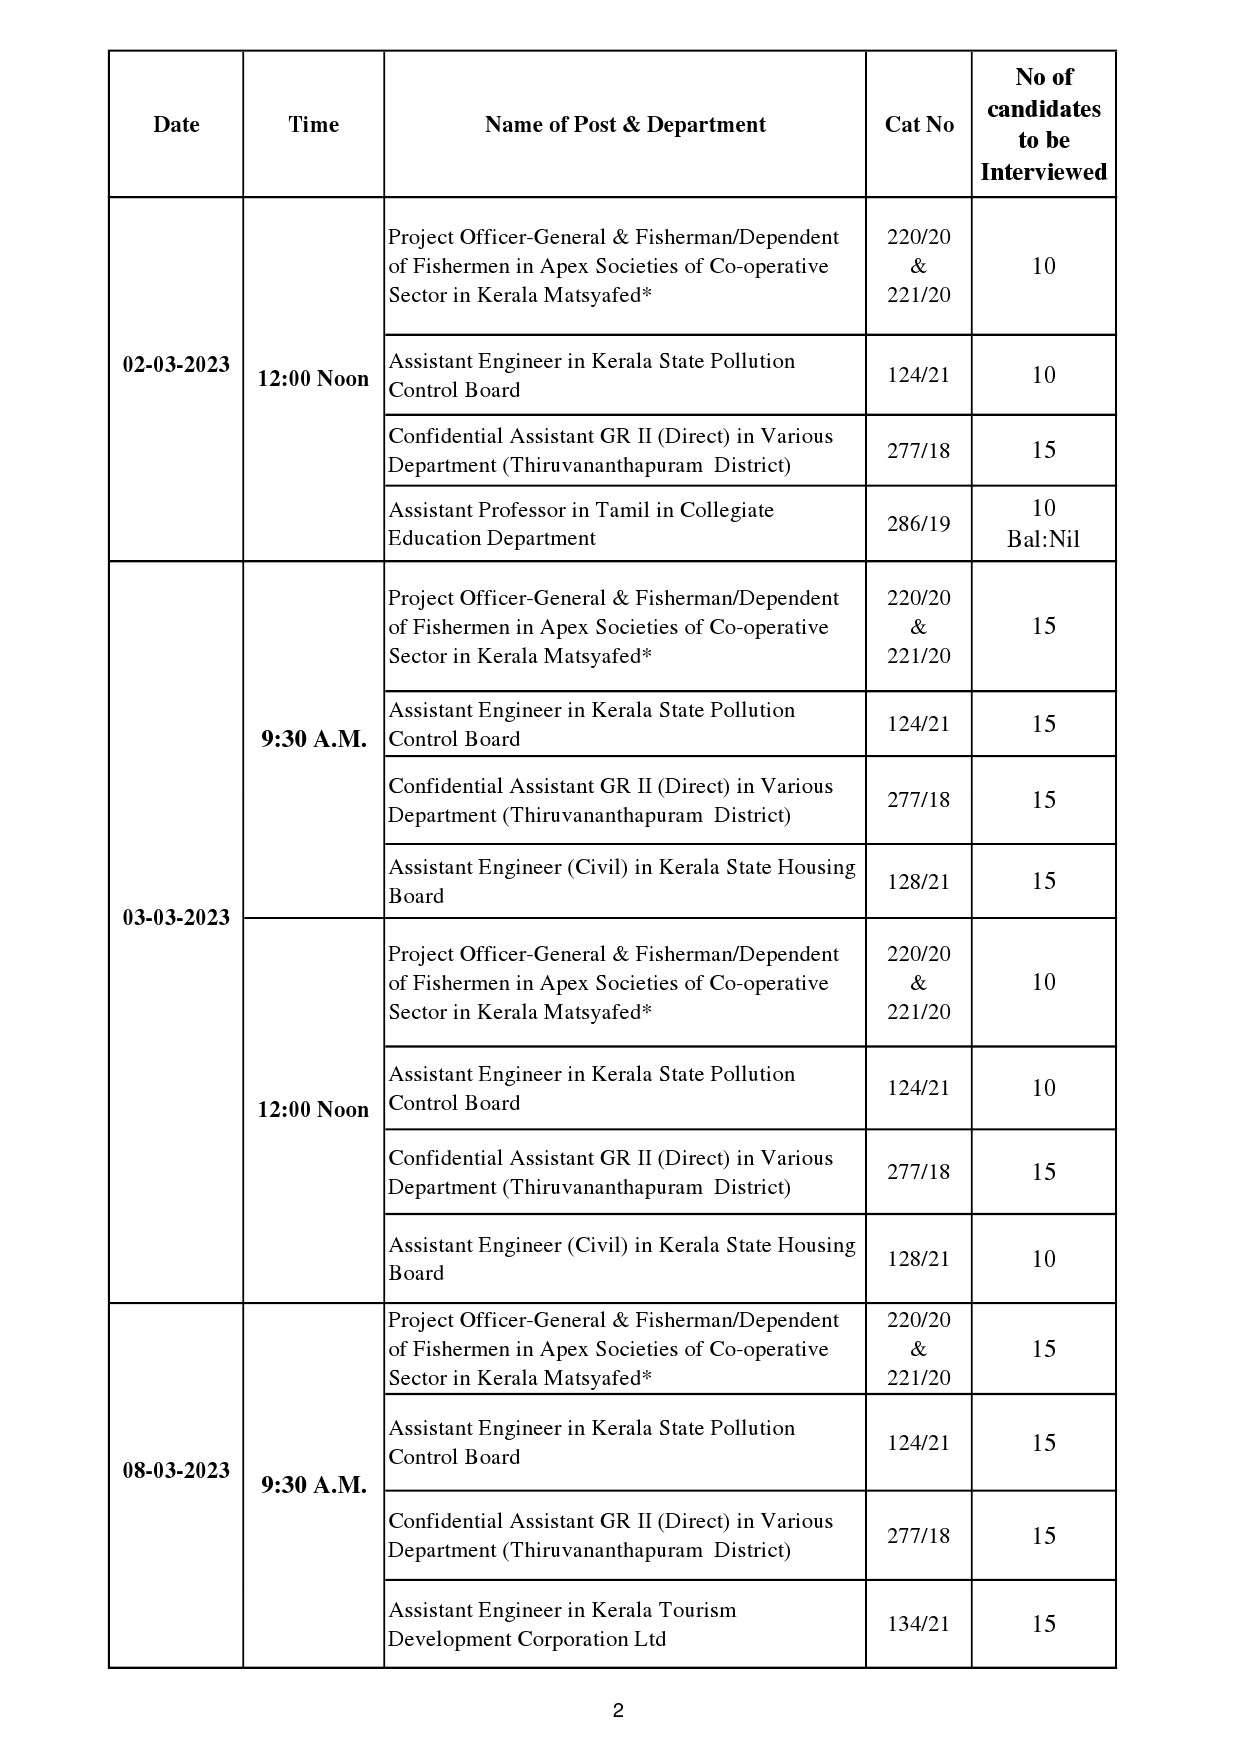 Interview Programme For The Month Of March 2023 - Notification Image 2